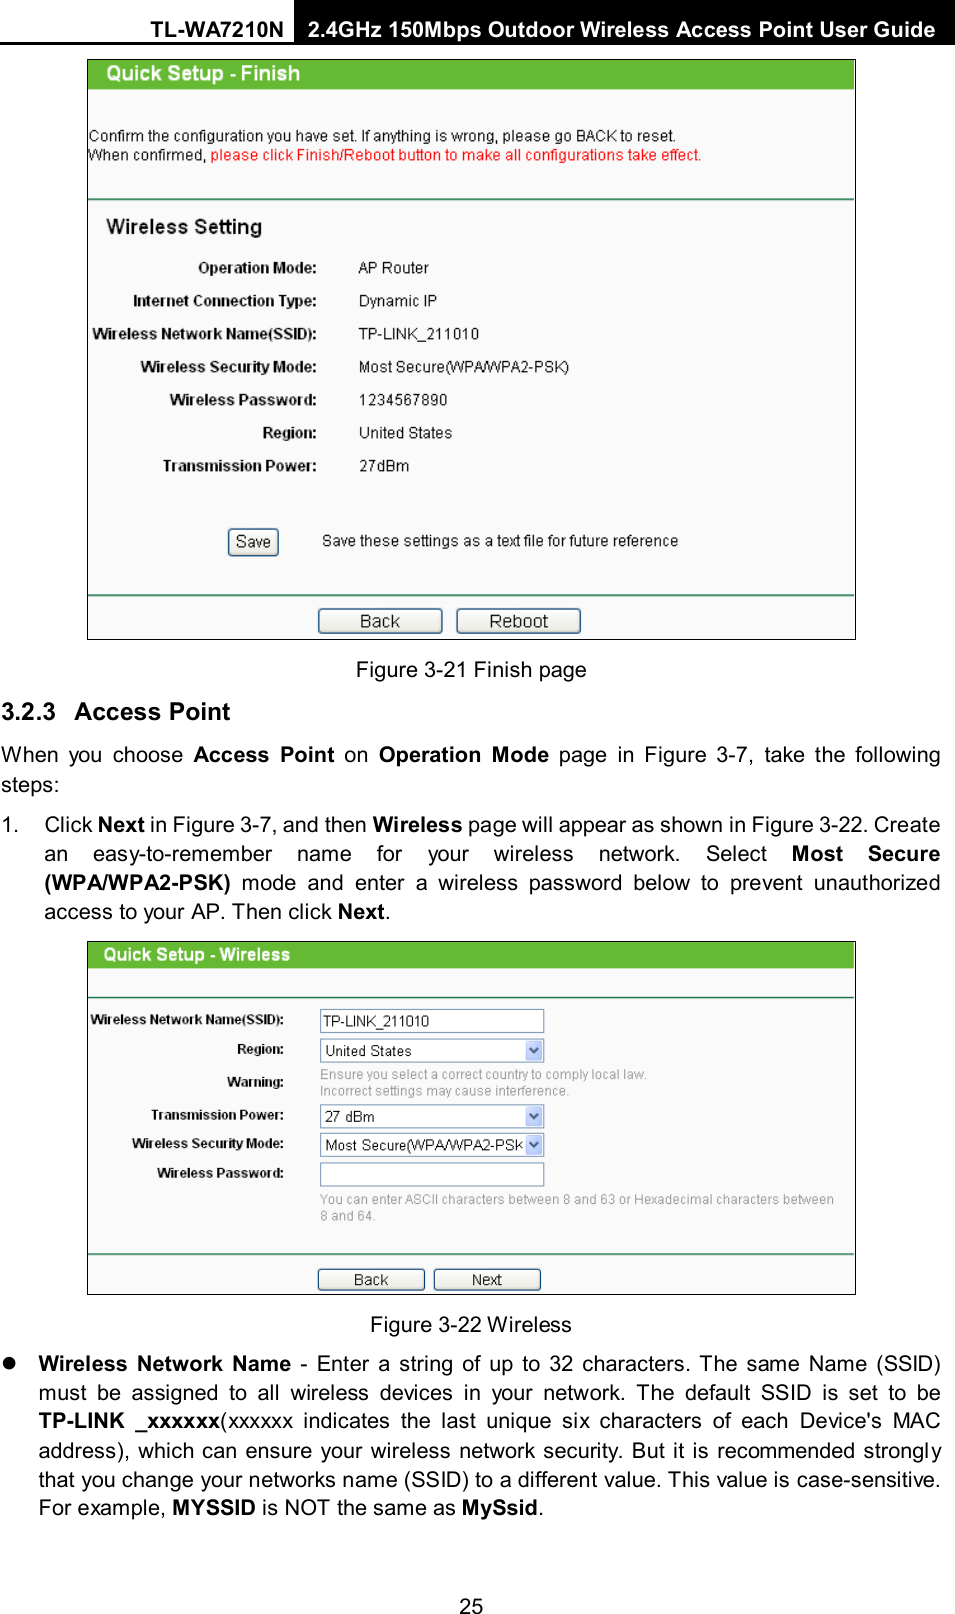 TL-WA7210N 2.4GHz 150Mbps Outdoor Wireless Access Point User Guide  25  Figure 3-21 Finish page 3.2.3 Access Point When you choose Access Point on  Operation Mode page in Figure  3-7, take the following steps: 1.  Click Next in Figure 3-7, and then Wireless page will appear as shown in Figure 3-22. Create an easy-to-remember name for your wireless network. Select Most Secure (WPA/WPA2-PSK) mode and enter a wireless password below to prevent unauthorized access to your AP. Then click Next.  Figure 3-22 Wireless  Wireless Network Name  - Enter a string of up to 32 characters. The same Name (SSID) must be assigned to all wireless devices in your network. The default SSID is set to be TP-LINK _xxxxxx(xxxxxx indicates the last unique six characters of each Device&apos;s MAC address), which can ensure your wireless network security. But it is recommended strongly that you change your networks name (SSID) to a different value. This value is case-sensitive. For example, MYSSID is NOT the same as MySsid. 